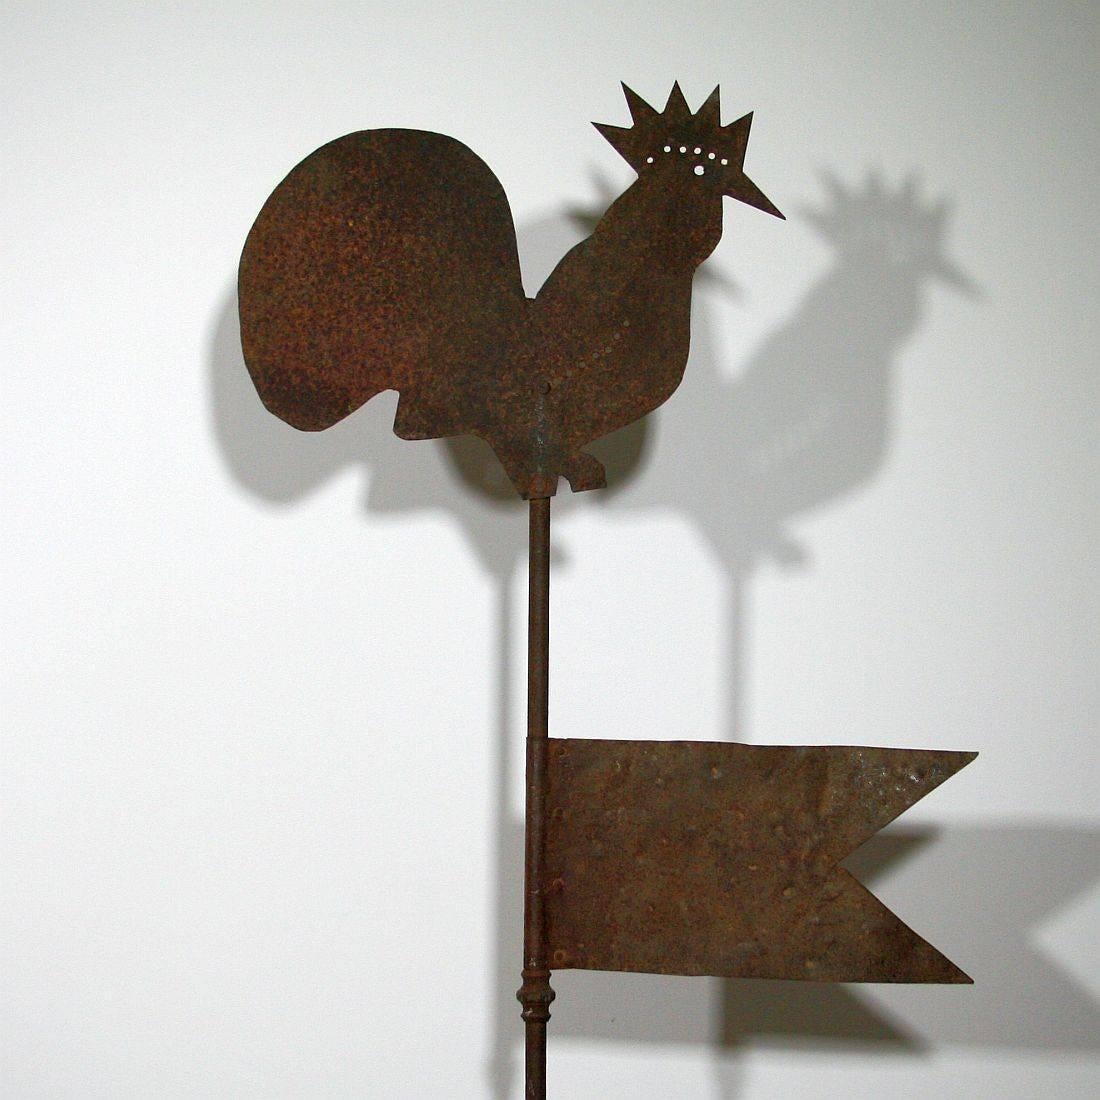 Beautiful iron weathervane with a rooster, it came from a church tower in the South of France,
circa 1750-1850
Weathered. Measurement here below is inclusive the wooden base.